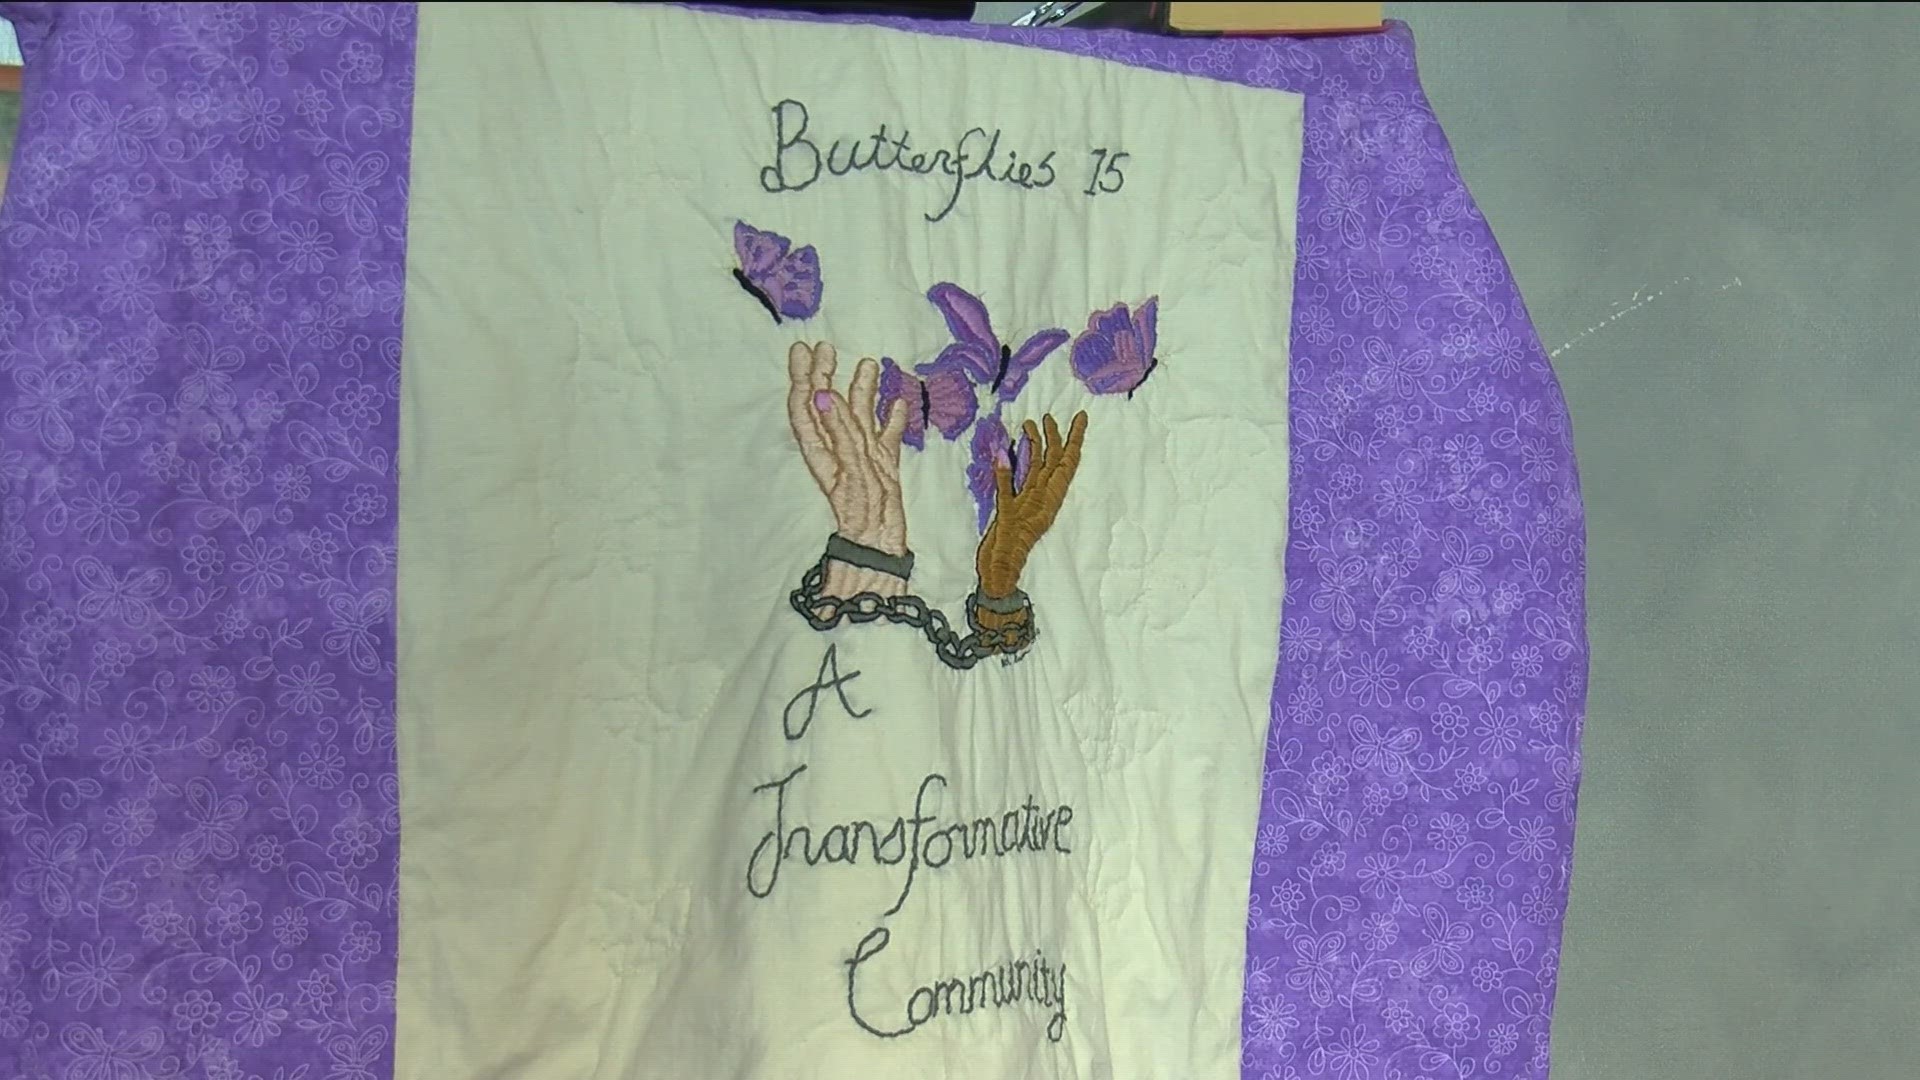 Butterflies 15 is a local drop-in center that helps women who have escaped human trafficking, domestic violence situations and substance abuse.